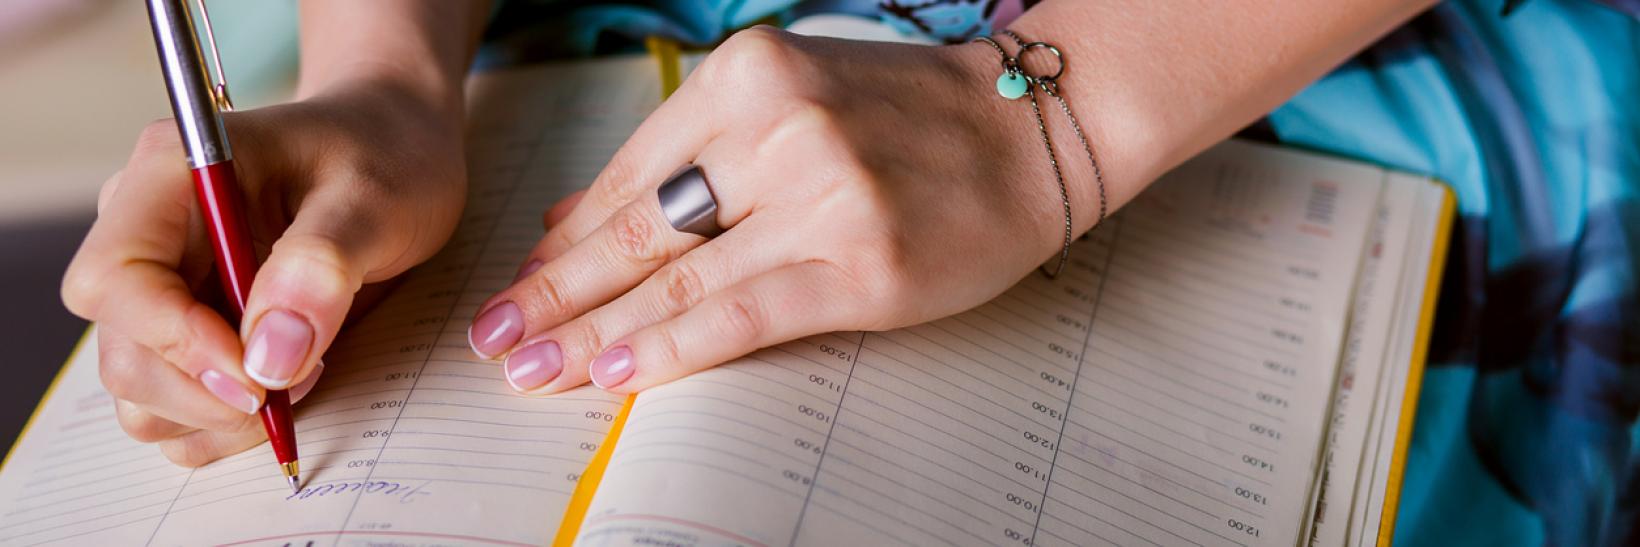 A woman is writing notes and planning schedule